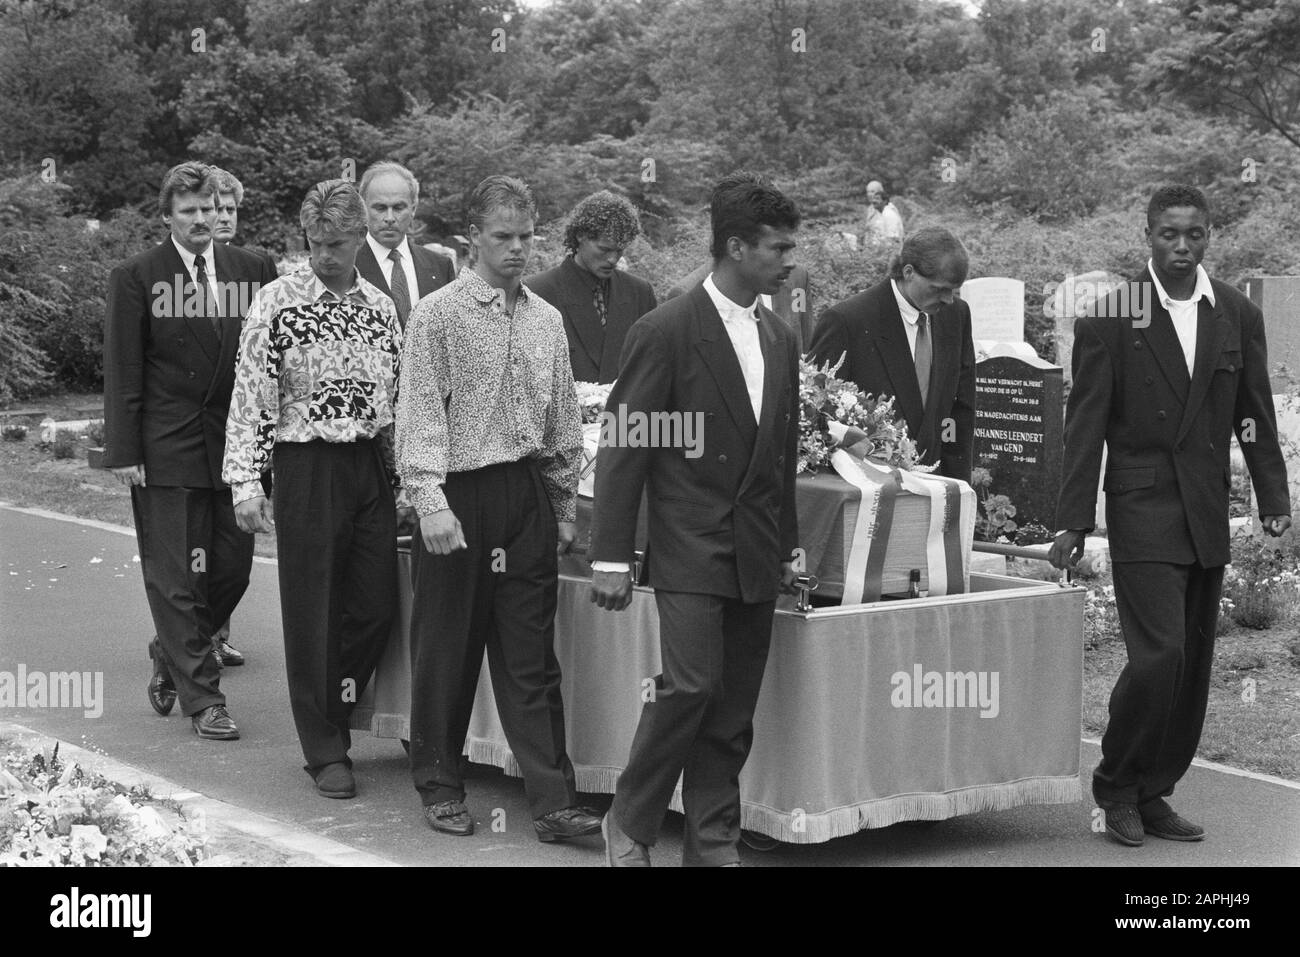 Funeral in Utrecht of Ajax keeper Lloyd Doesburg (killed in the plane crash with the SLM aircraft in Suriname) Description: The coffin is carried to the grave. Among others: Aron Winter, Arie van Eijden, Frank and Ronald de Boer, Michael van Prague and Danny Blind. Right, Bryan Roy. Date: 22 June 1989 Location: Utrecht (prov), Utrecht (city) Keywords: goalkeepers, airlines, farewell flights, football clubs Personal name: Doesburg, Lloyd Stock Photo